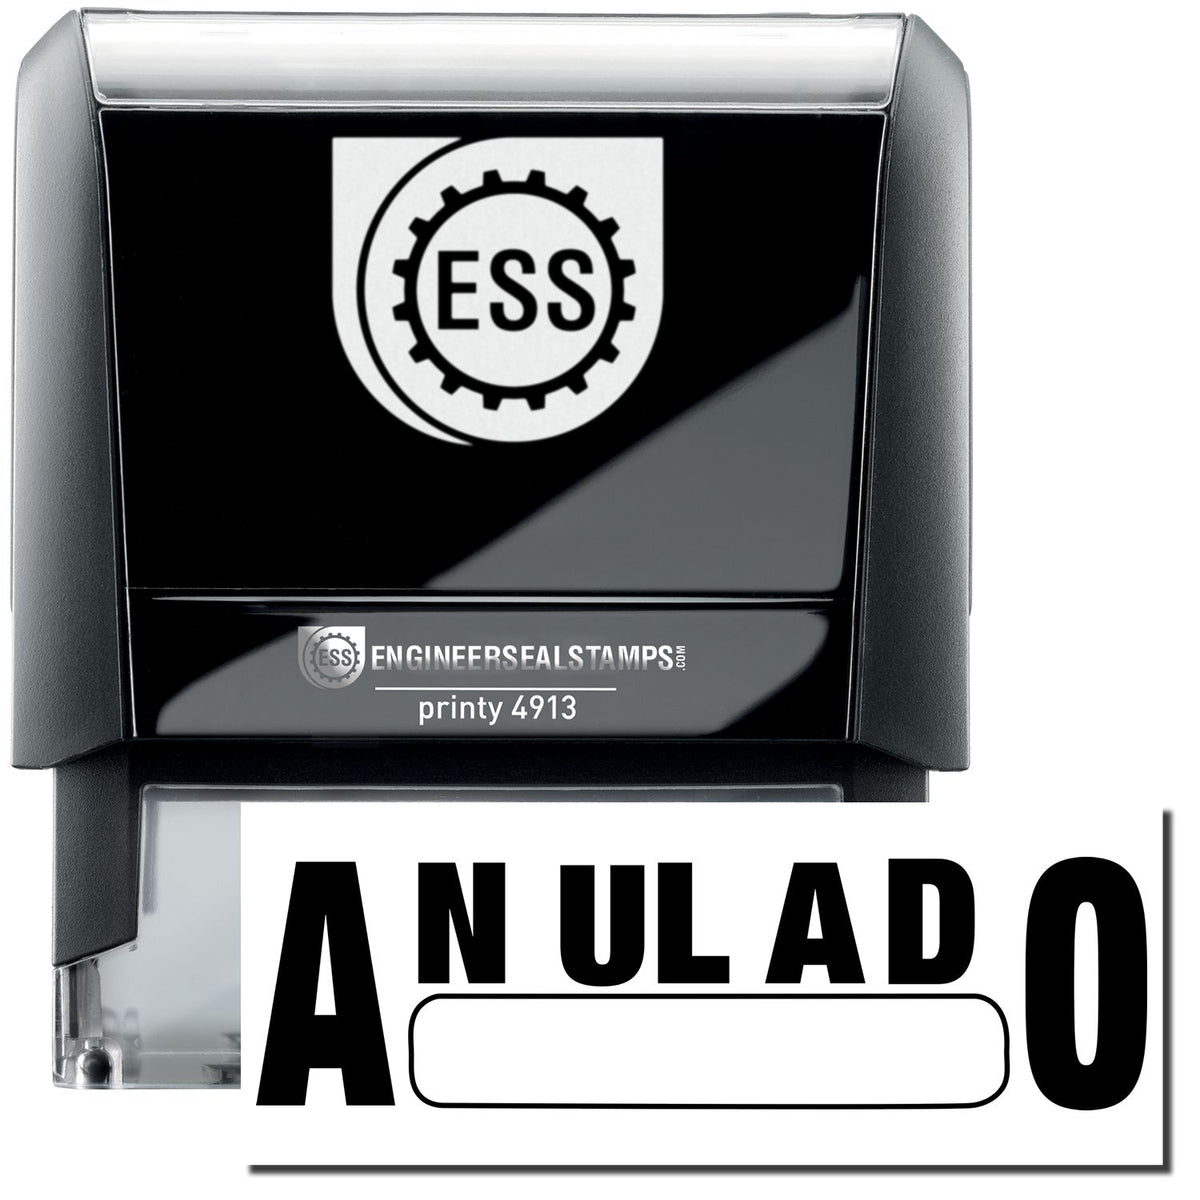 A self-inking stamp with a stamped image showing how the text &quot;ANULADO&quot; in a large font with a Box under it is displayed after stamping.